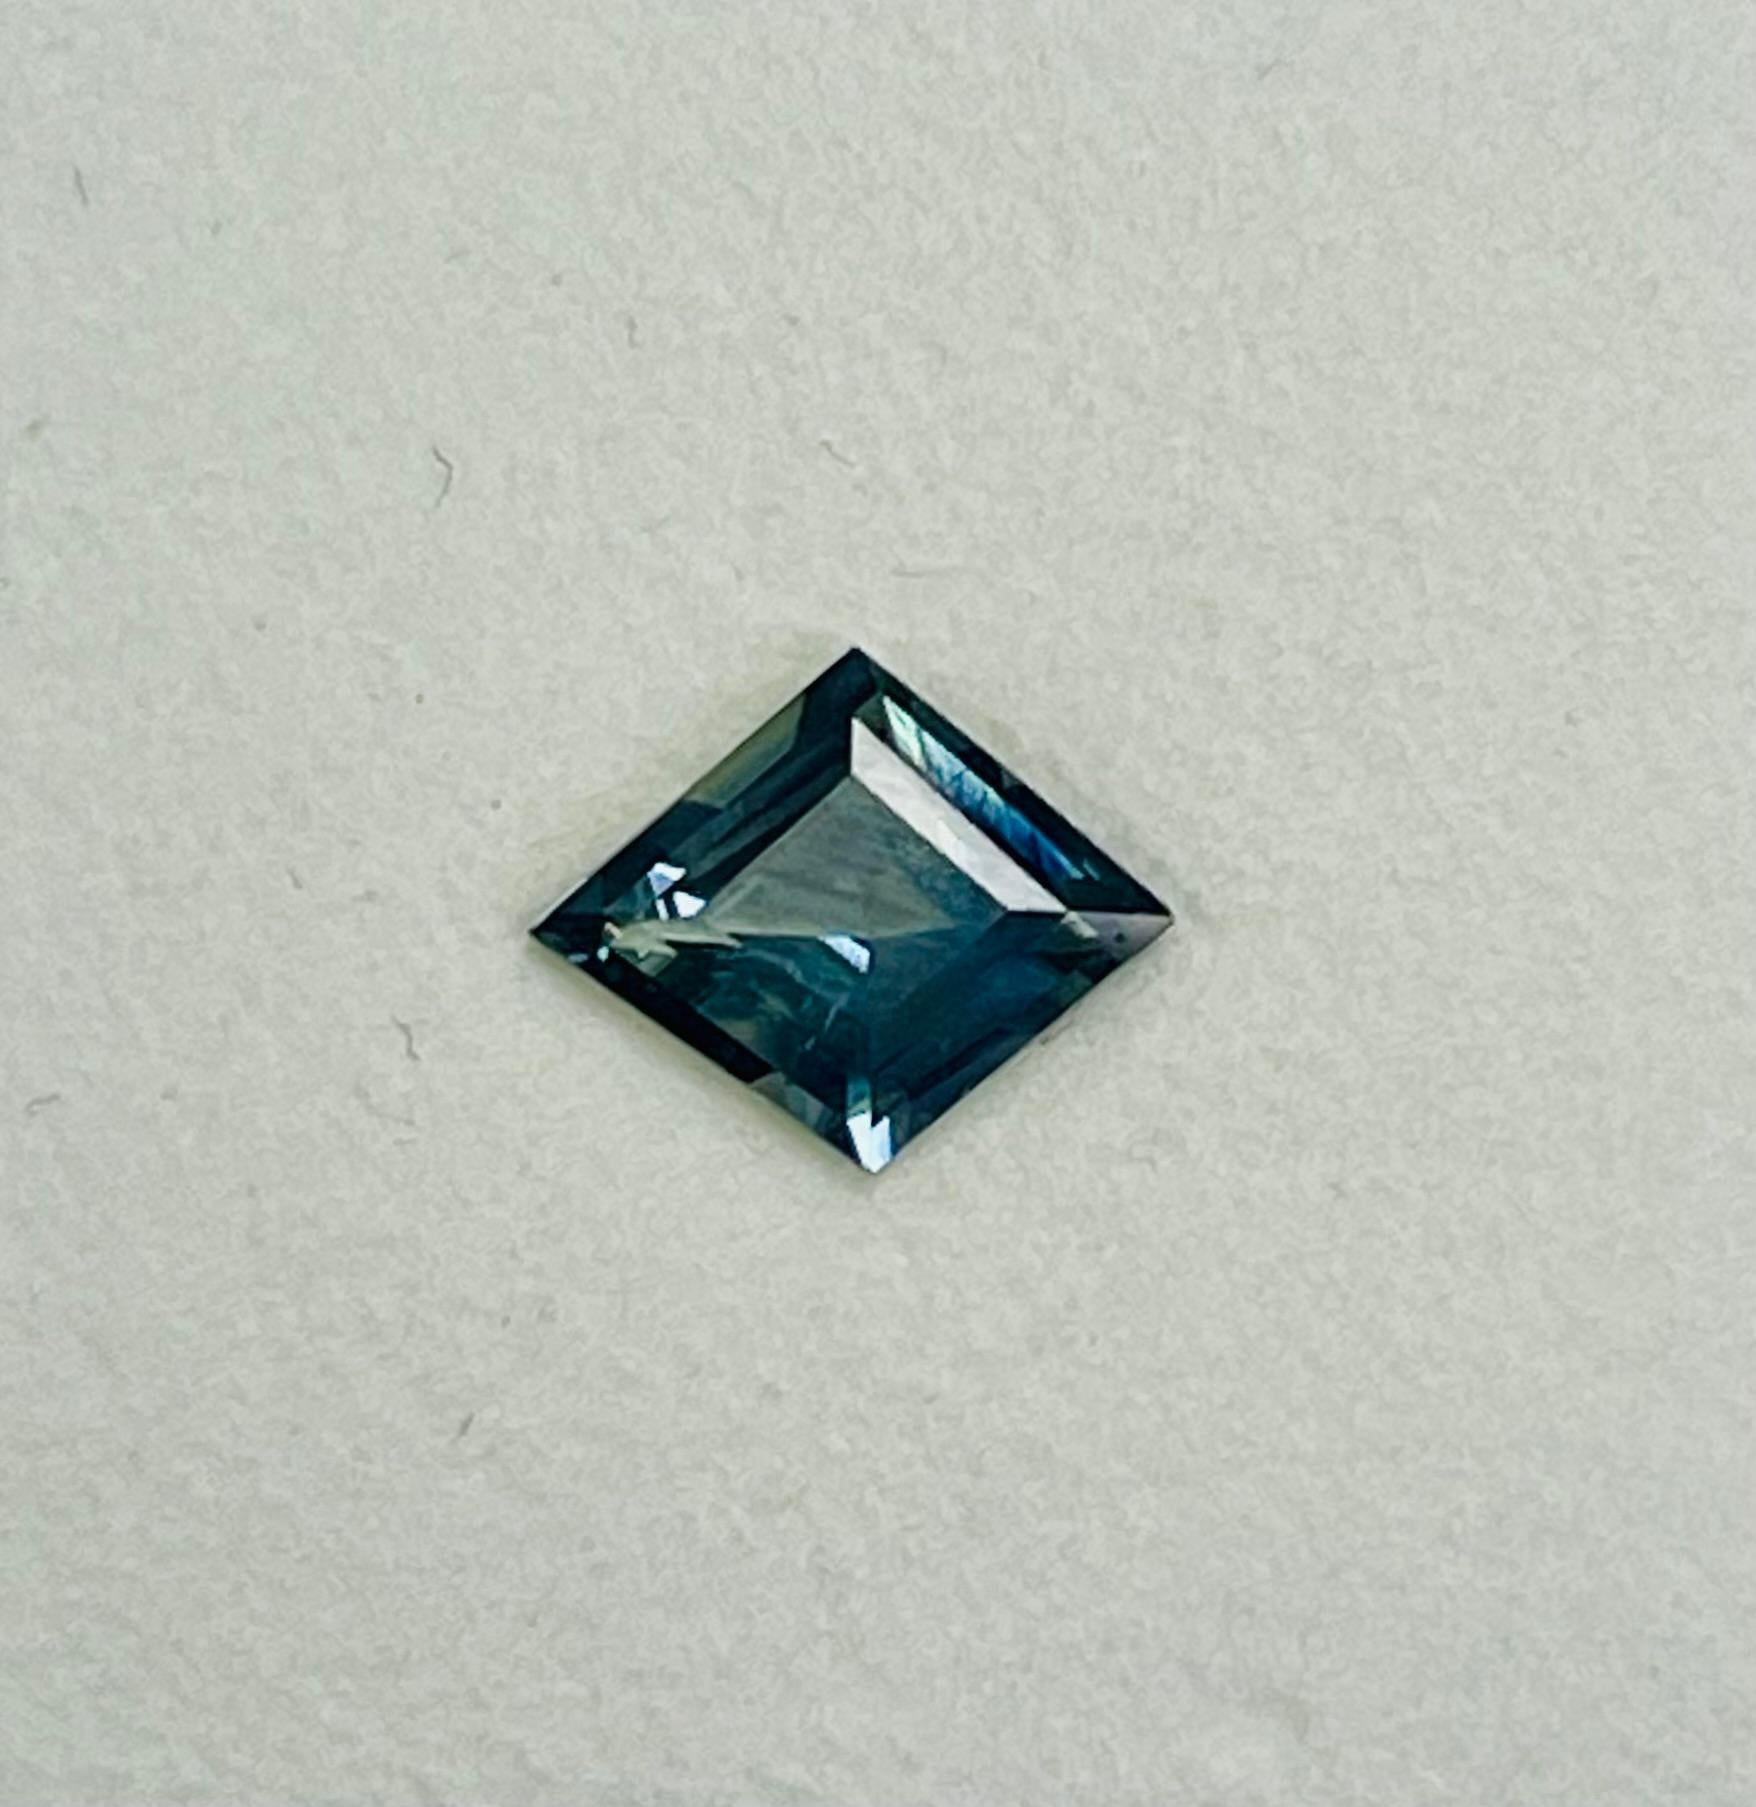 This 2.06 Ct Kite shape sapphire is great unusual kite shape and of great Clarity and also exhibits blueish green tone color that is referred to as Teal color sapphire variety now days .heat enhanced only .